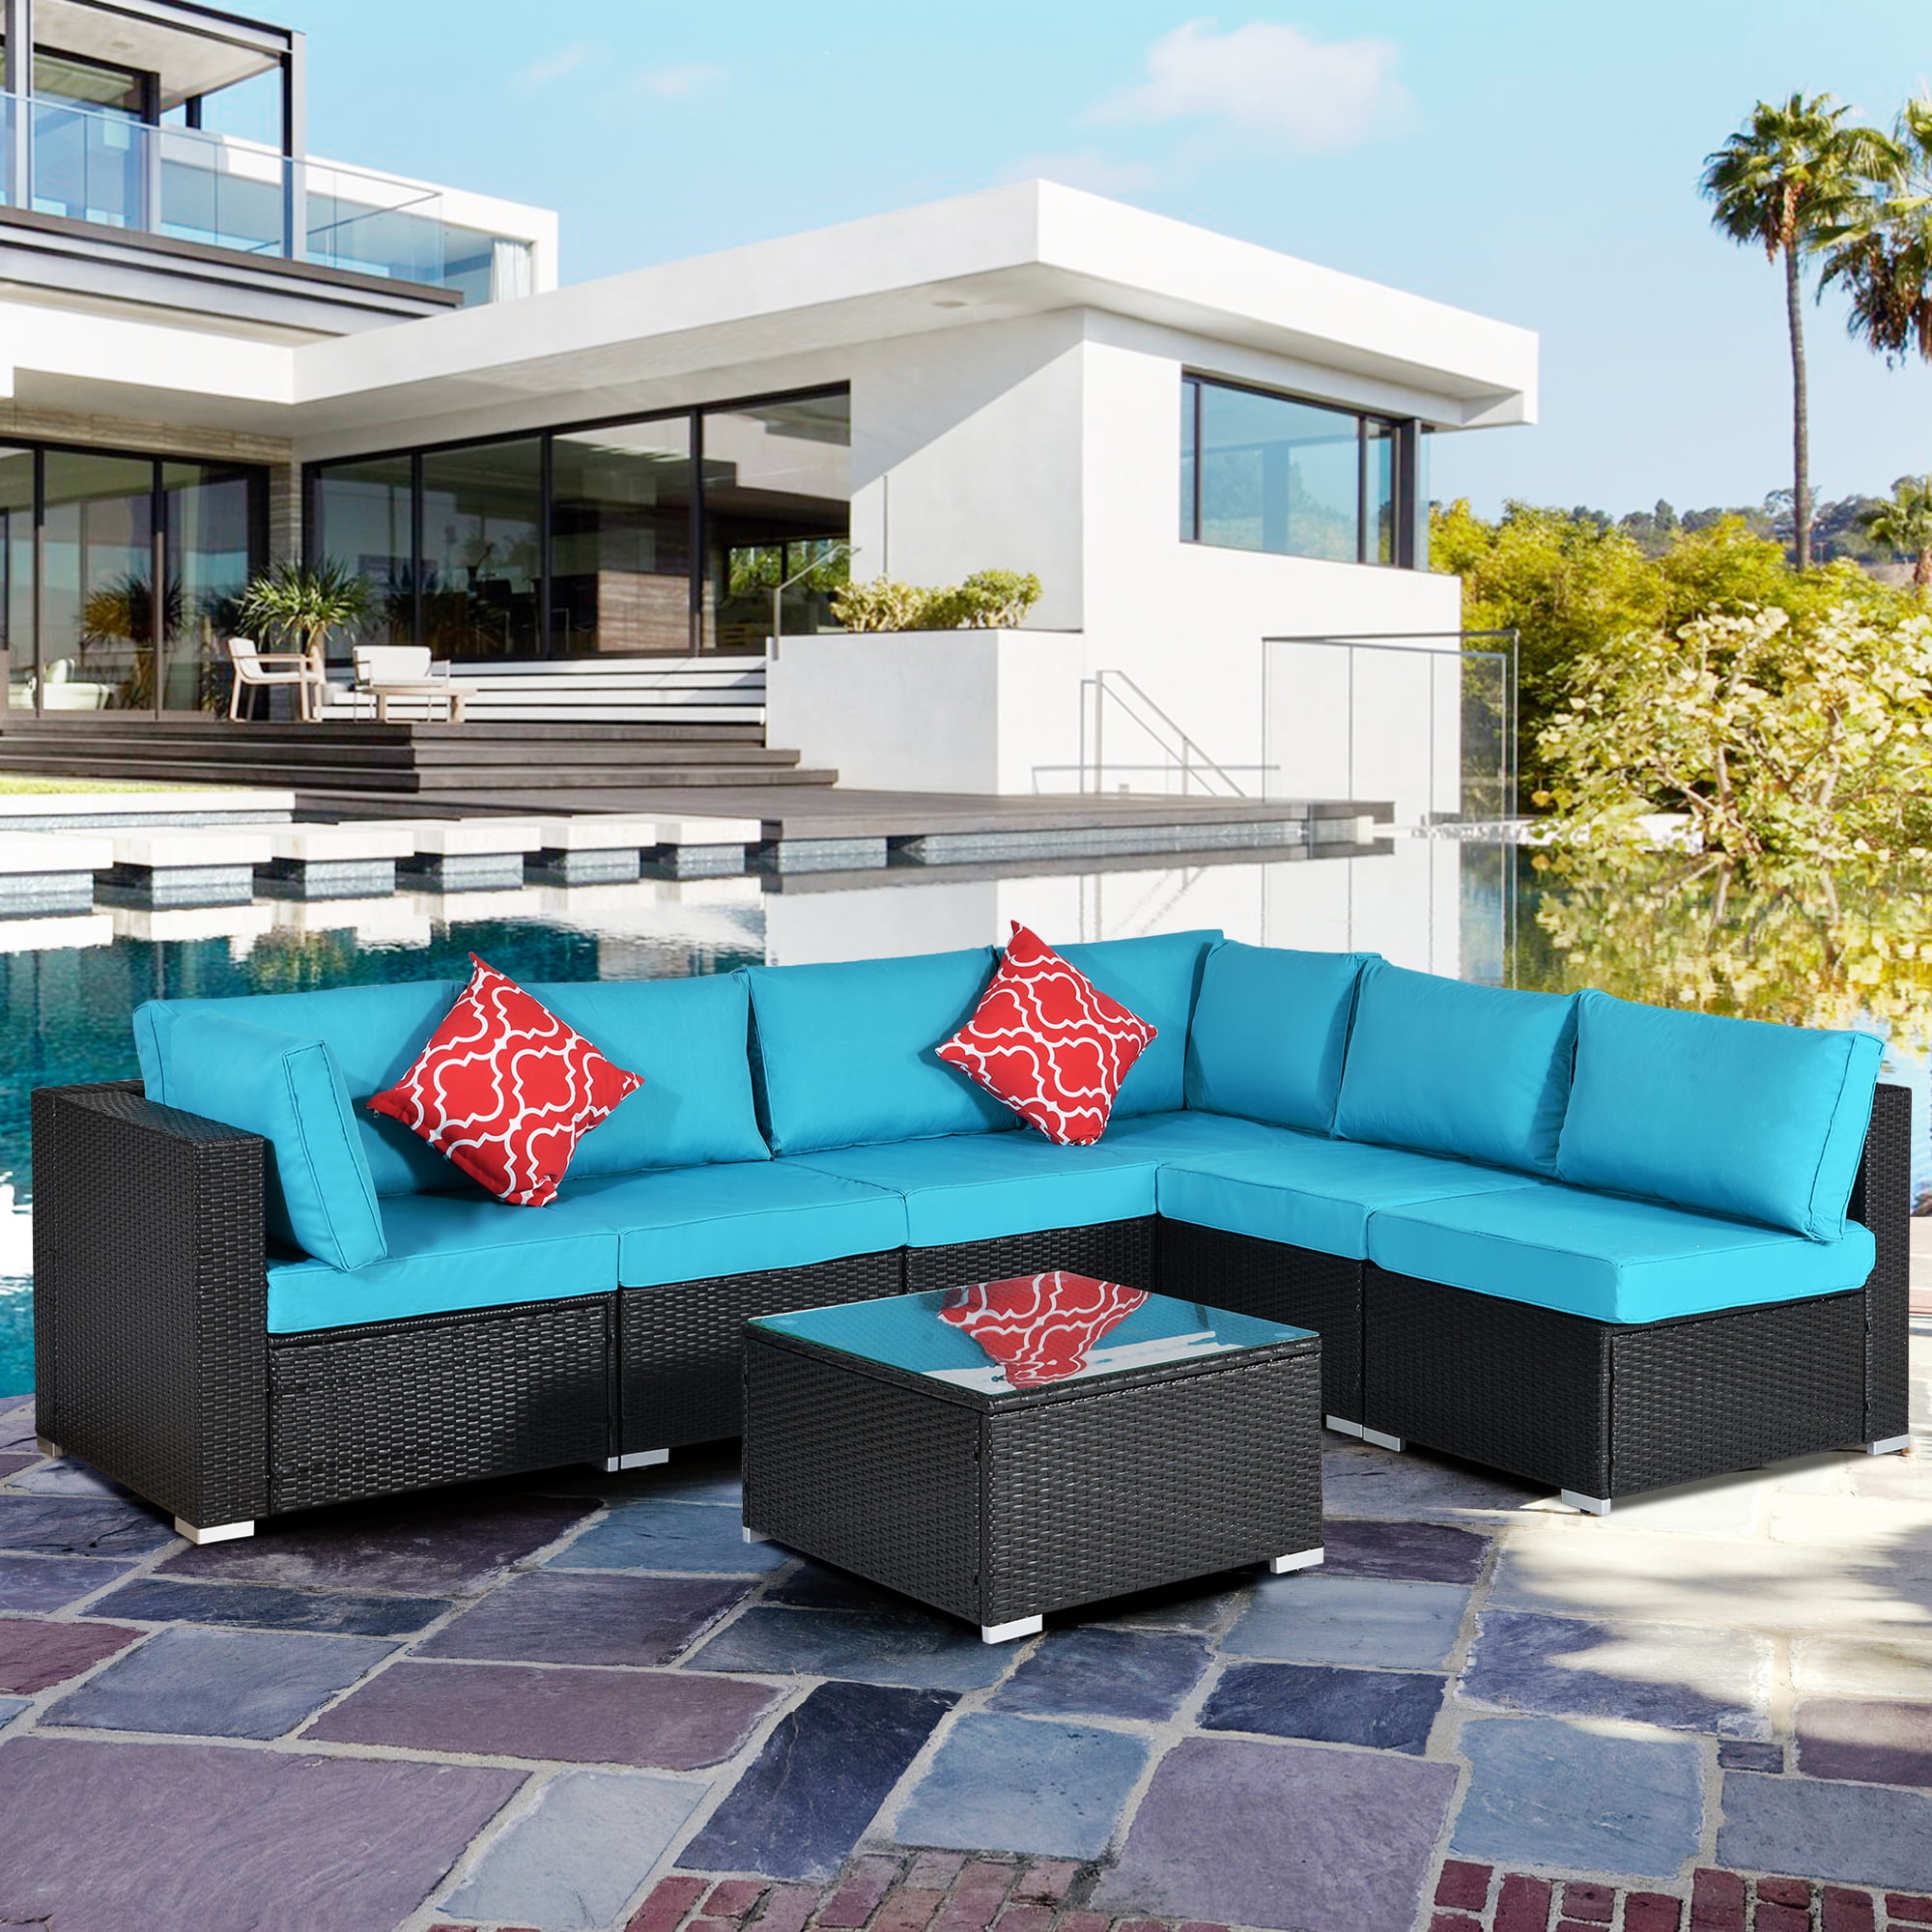 Details about   7 Pcs Garden Couch Wicker Rattan Sofa Sectional Furniture Royal Blue Cushions 